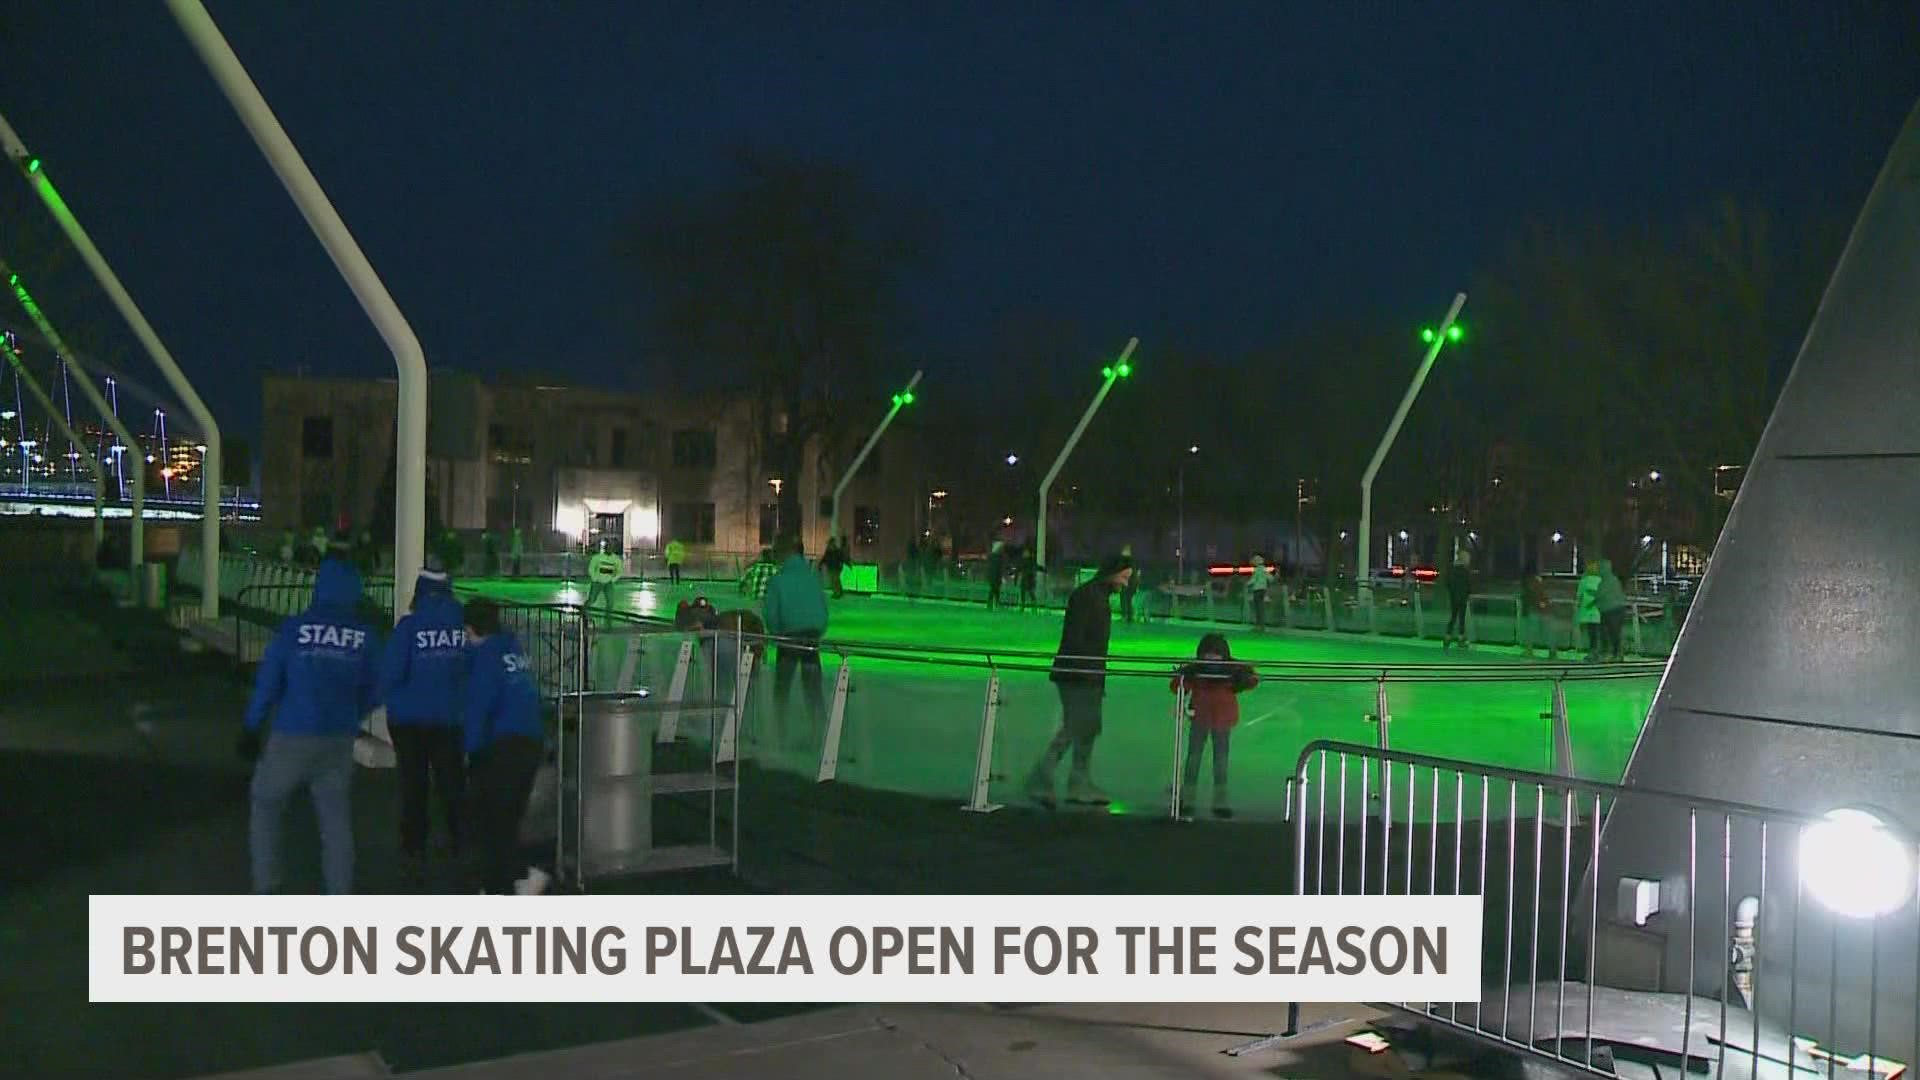 Online registration for skating sessions will be available once the season begins. Walk-up admission will be allowed "if space allows," according to the city.